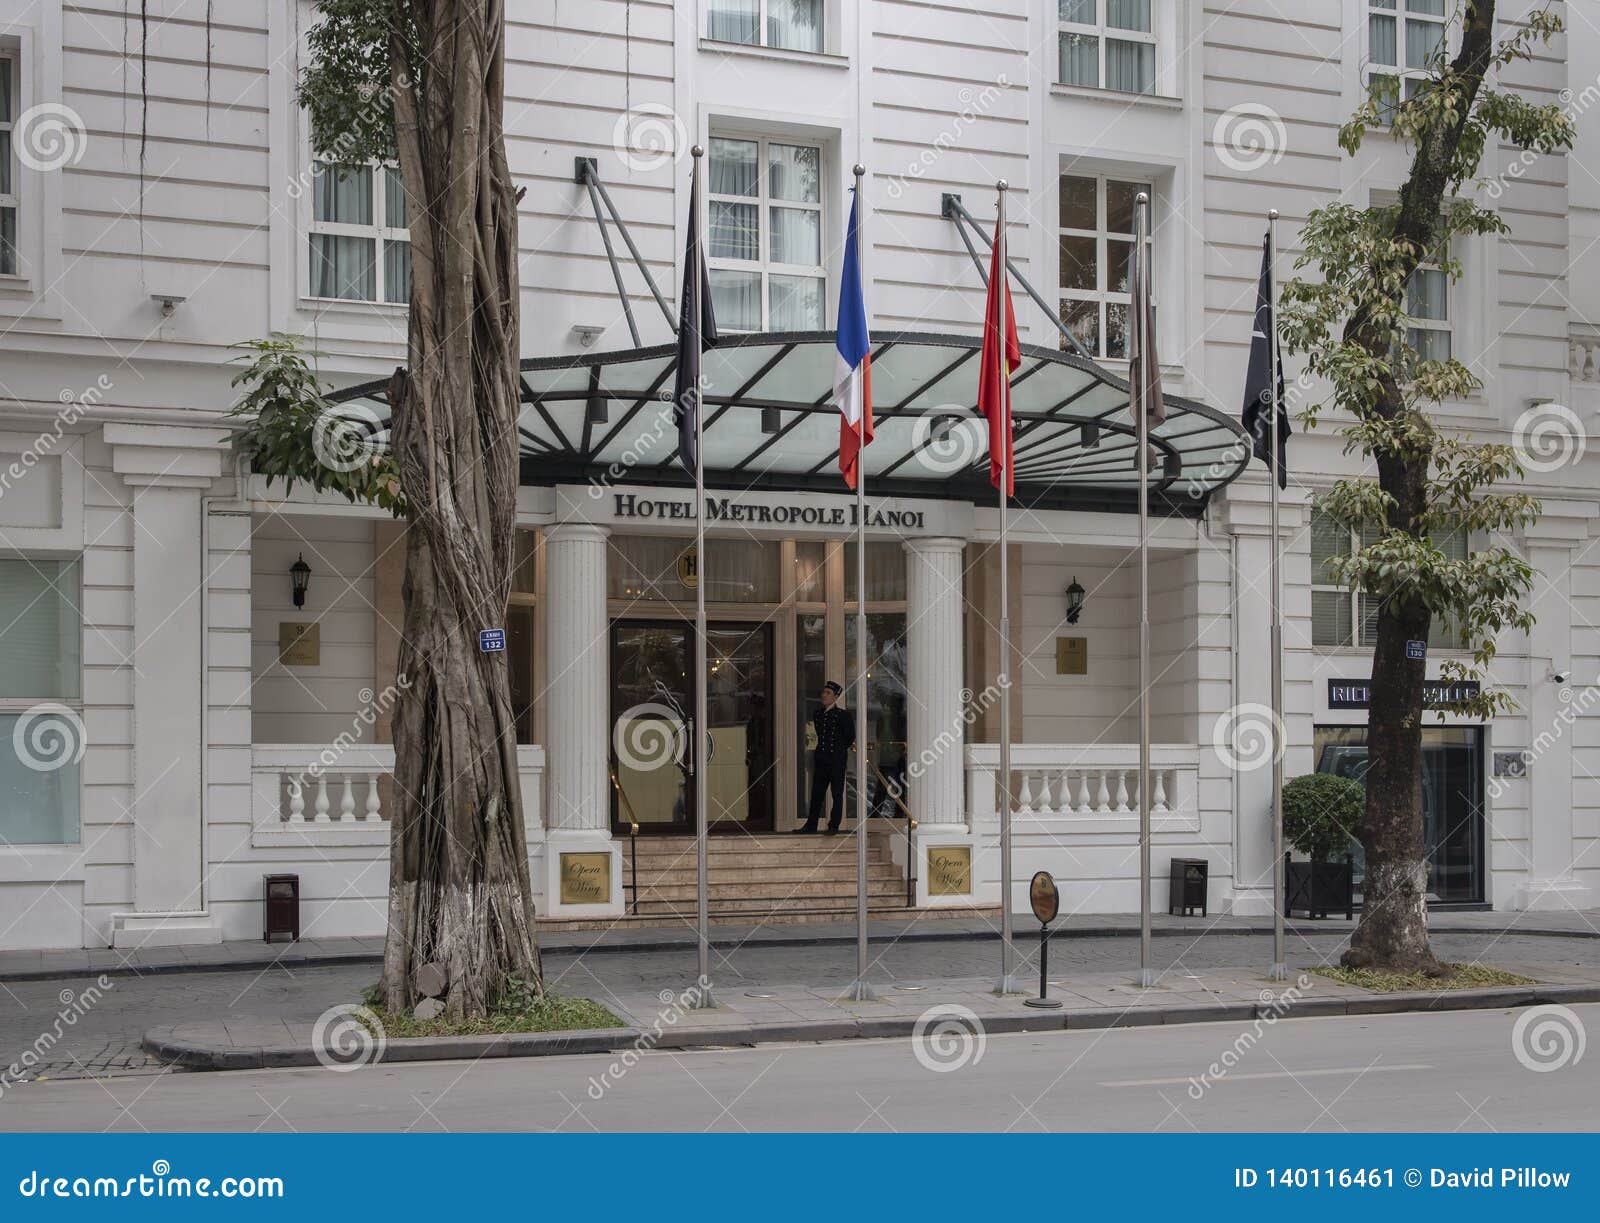 Metropole, Hanoi, Vietnam: 5 star historic luxury hotel built in 1901 in  the French colonial style. With Louis Vuitton vintage…